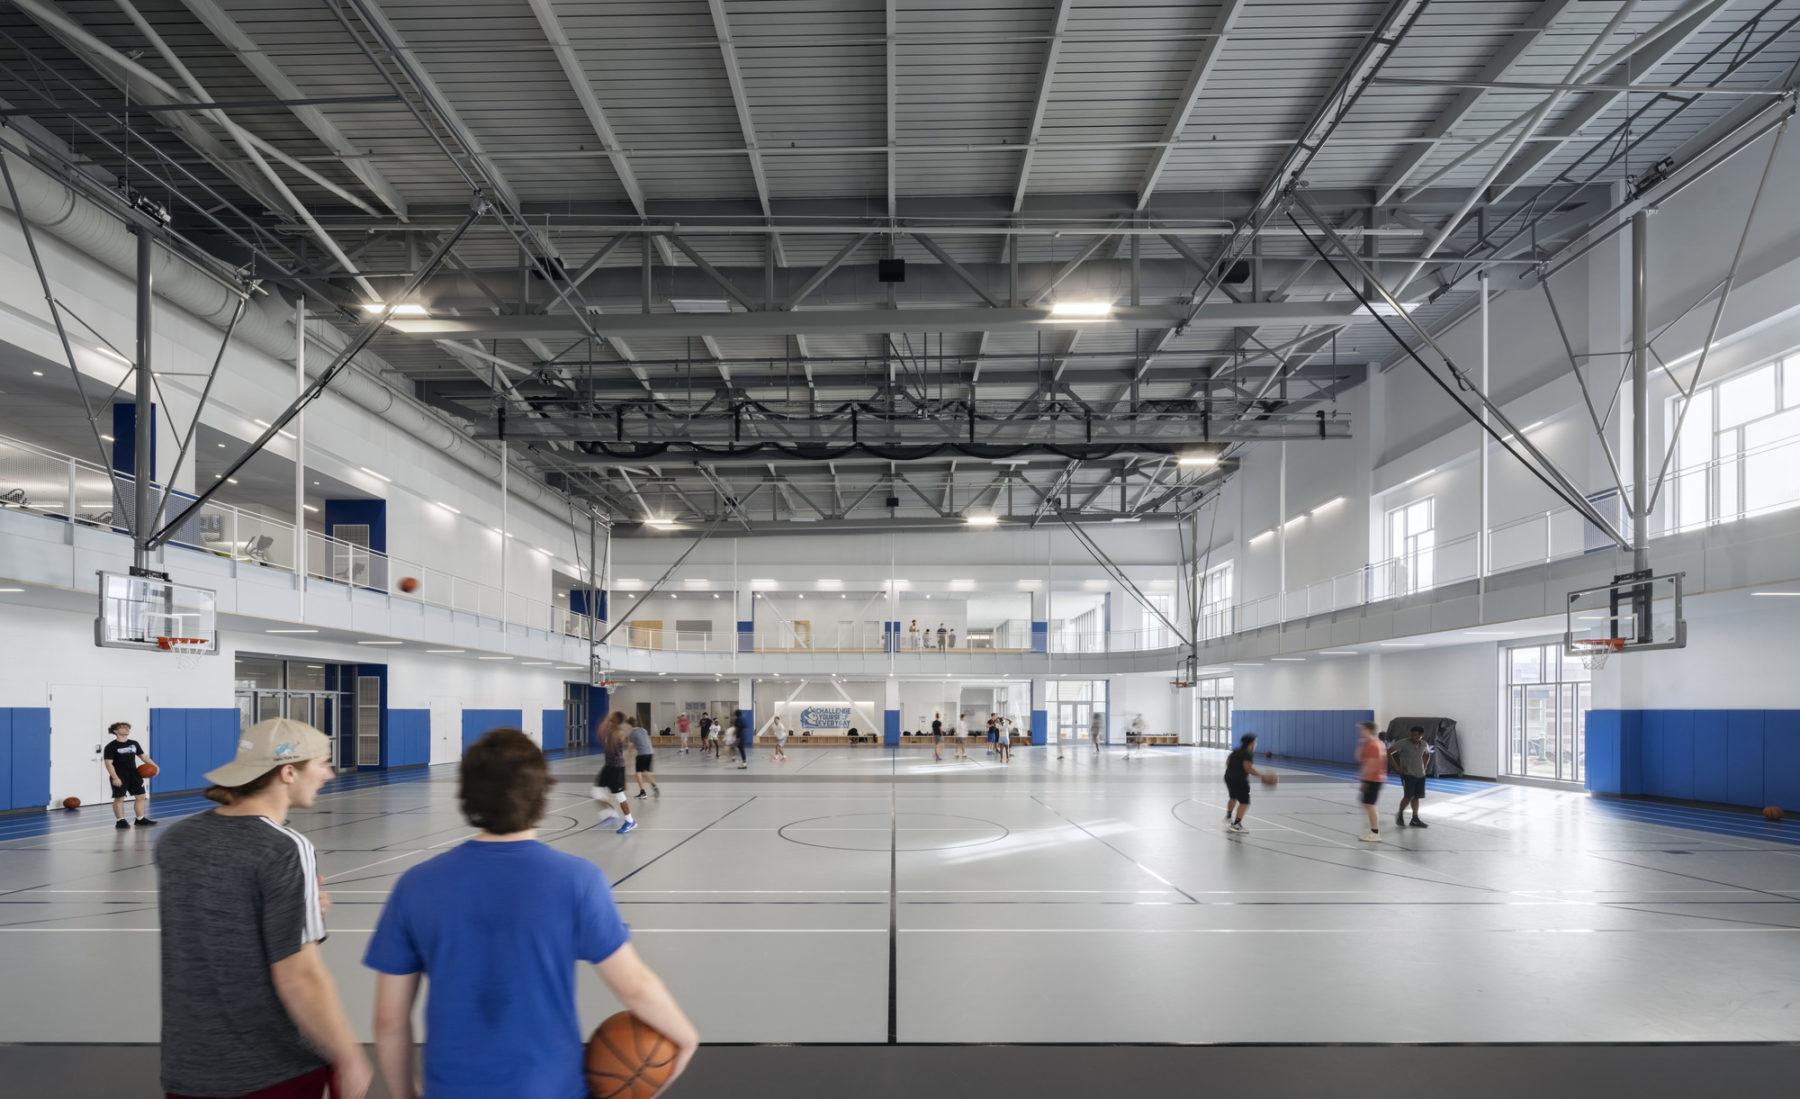 interior photo looking straight at basketball courts. A boy in a blue shirt looks at courts while holding a basketball in his right hand